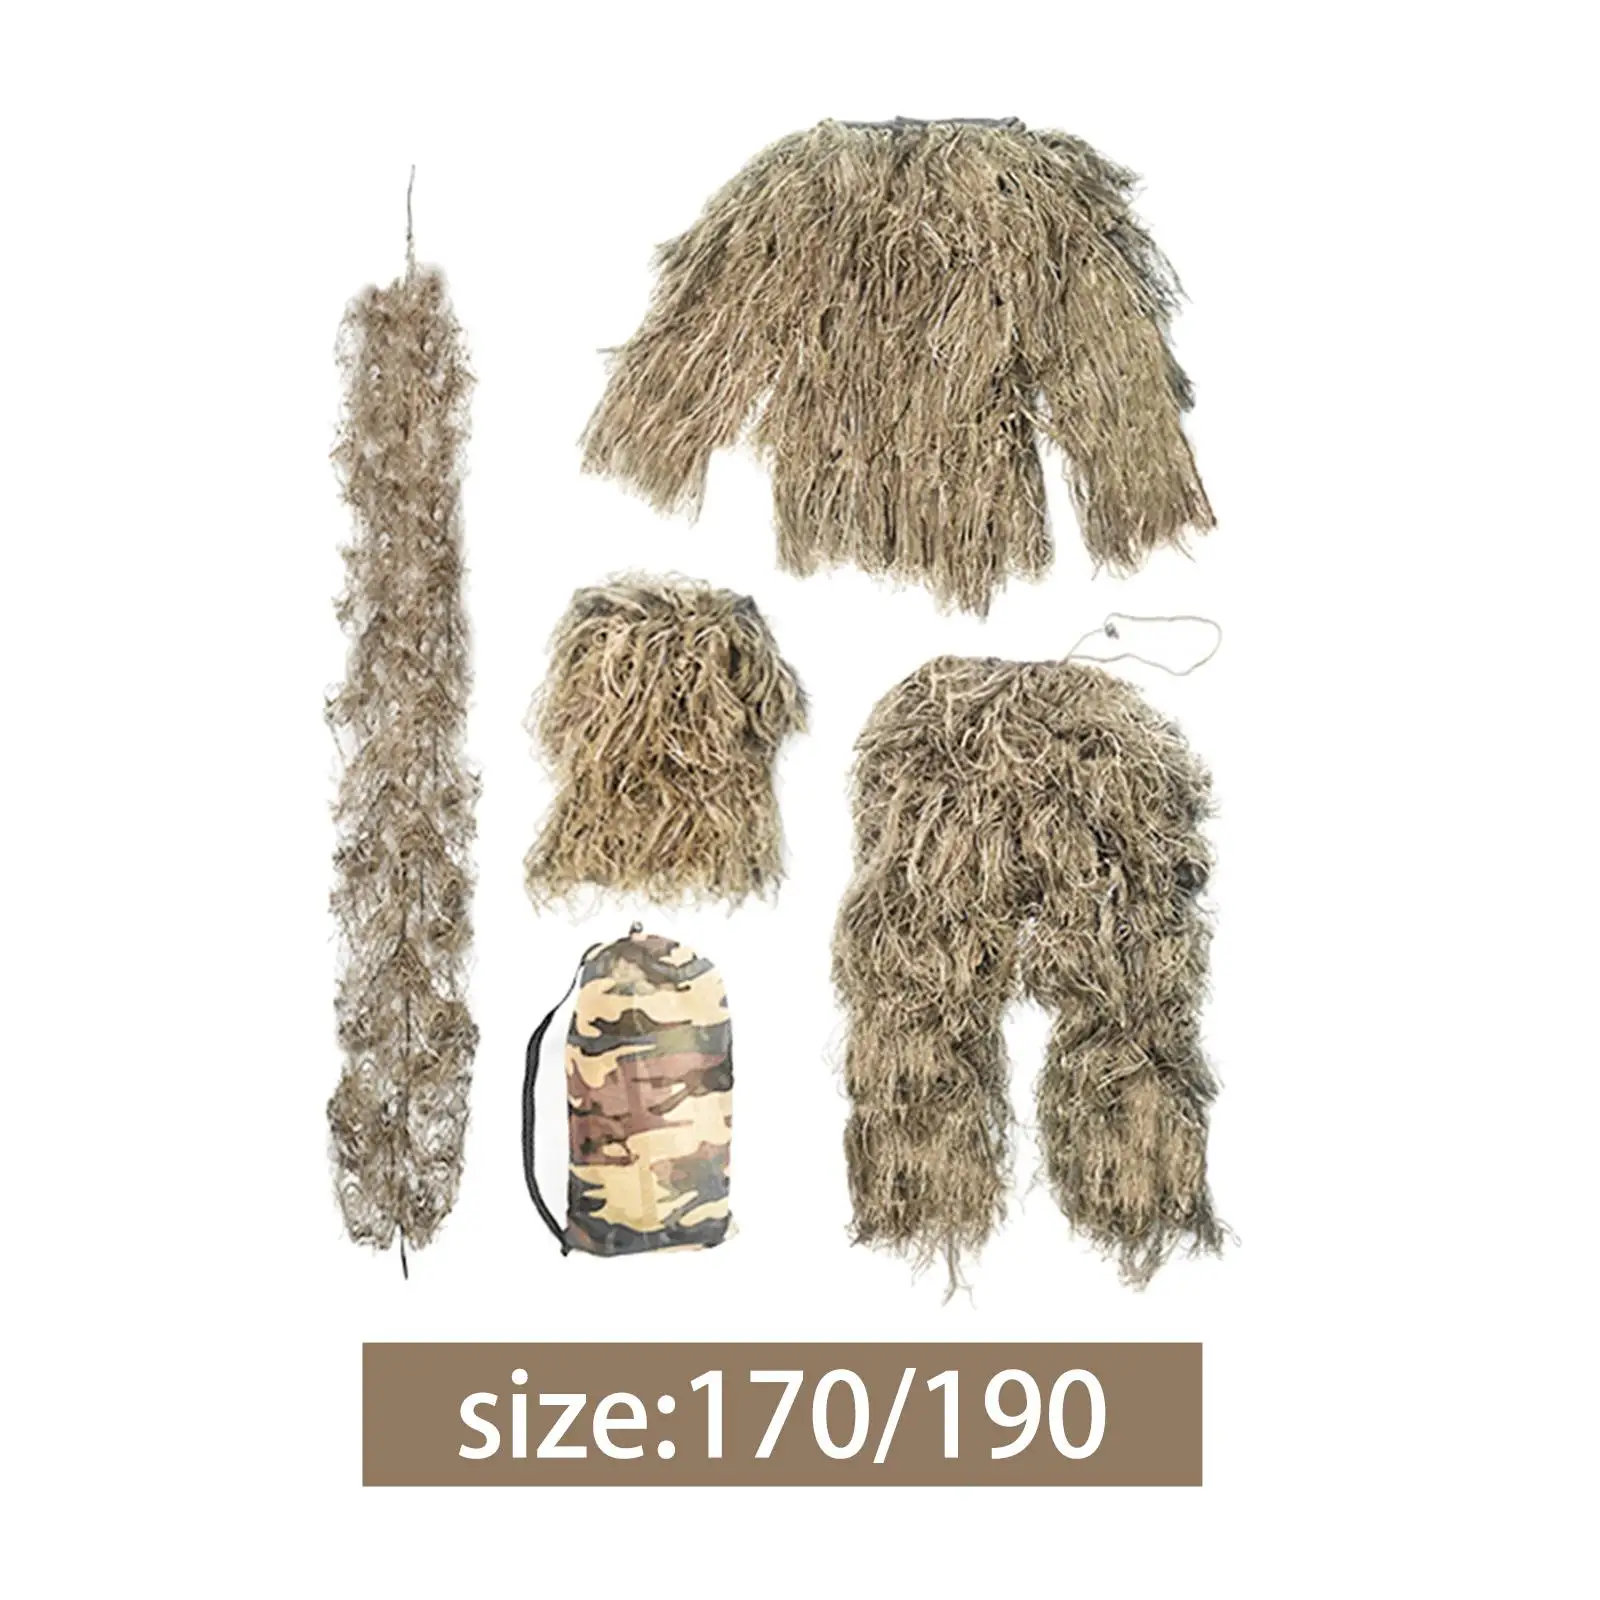 Ghillie Suit Fancy Dress Pants with Storage Bag Jacket Clothing Costume for Game